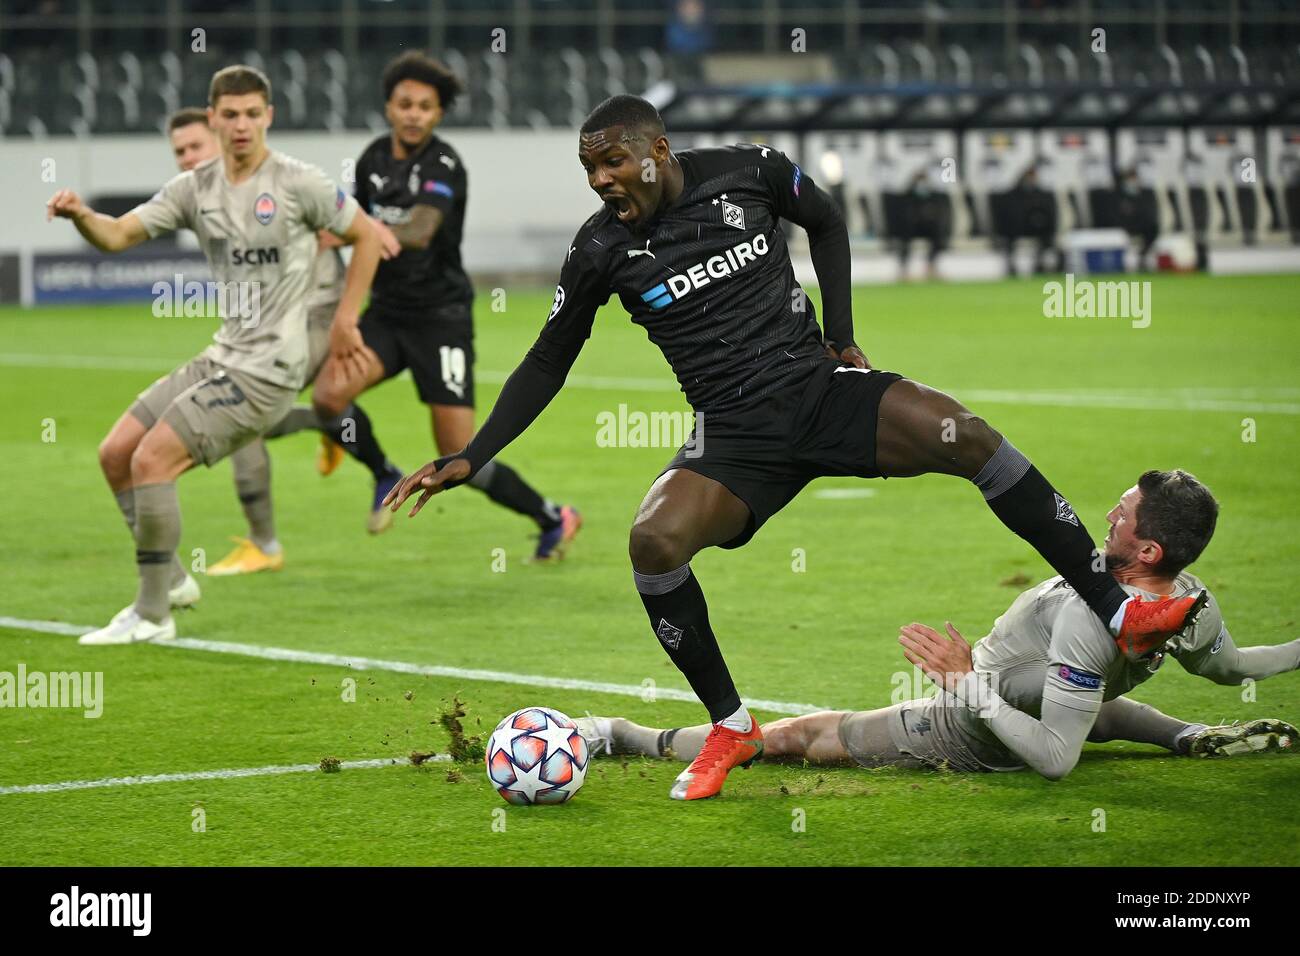 Moenchengladbach, Germany. 25th Nov, 2020. Marcus Thuram(Front) of Moenchengladbach competes during the UEFA Champions League Group B football match between Borussia Moenchangladbach and FC Shakhtar Donetsk in Moenchangladbach, Germany, Nov. 25, 2020. Credit: Ulrich Hufnagel/Xinhua/Alamy Live News Stock Photo